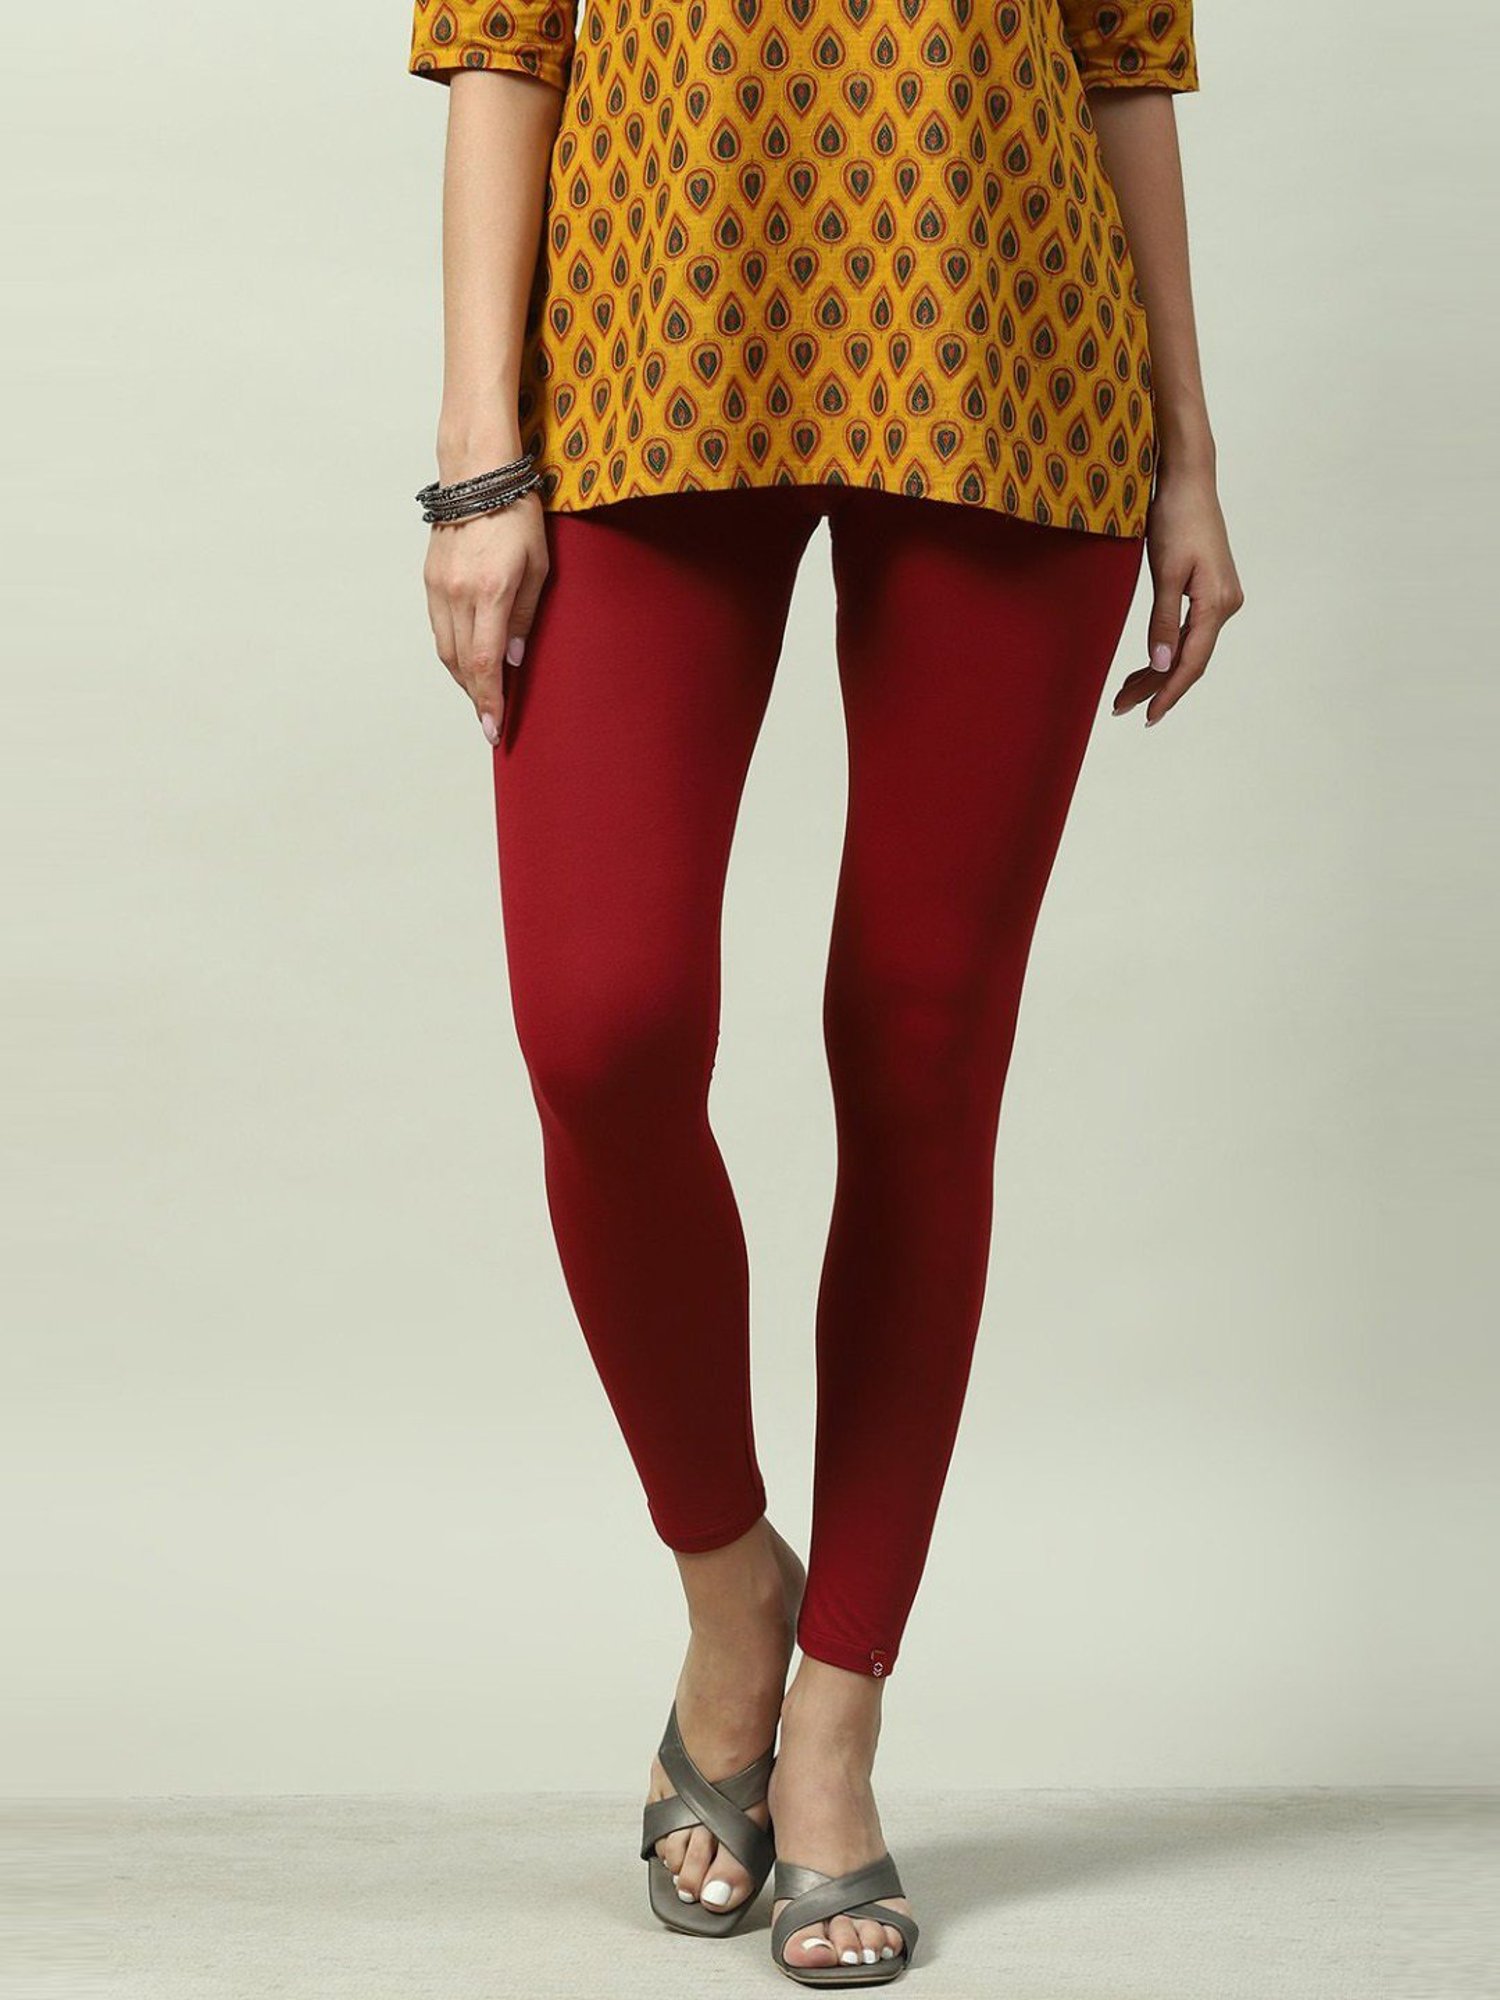 BIBA Cotton And Polyester Leggings XL (Red) in Latur at best price by  Phulpakharu The Perfect Ladies Wear - Justdial